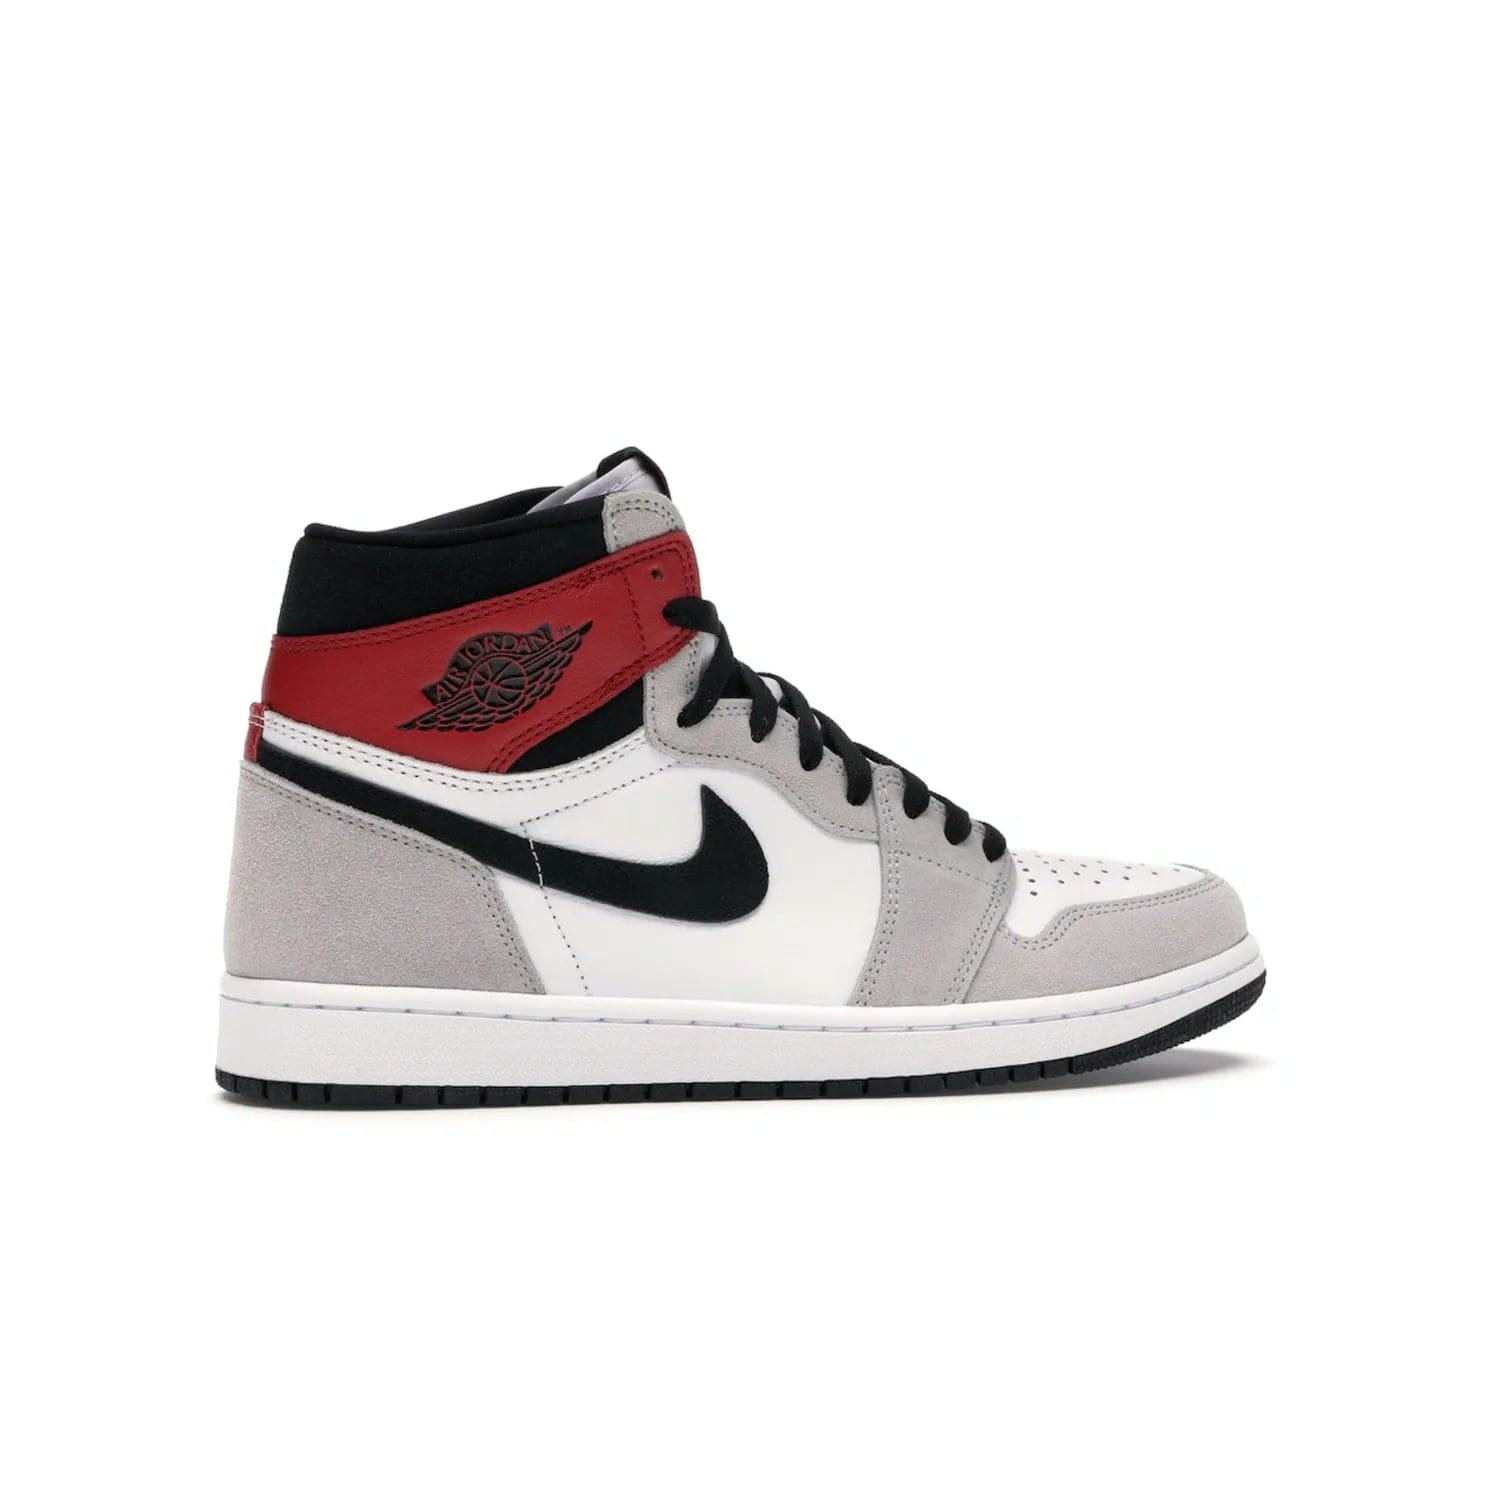 Jordan 1 Retro High Light Smoke Grey - Image 35 - Only at www.BallersClubKickz.com - Comfortable and stylish, Jordan 1 Retro High Light Smoke Grey offers a unique spin on a classic design. White leather, grey suede, red leather and black details are set on a white midsole and black outsole. Get the sneaker released in July 2020 and add a twist to your wardrobe.